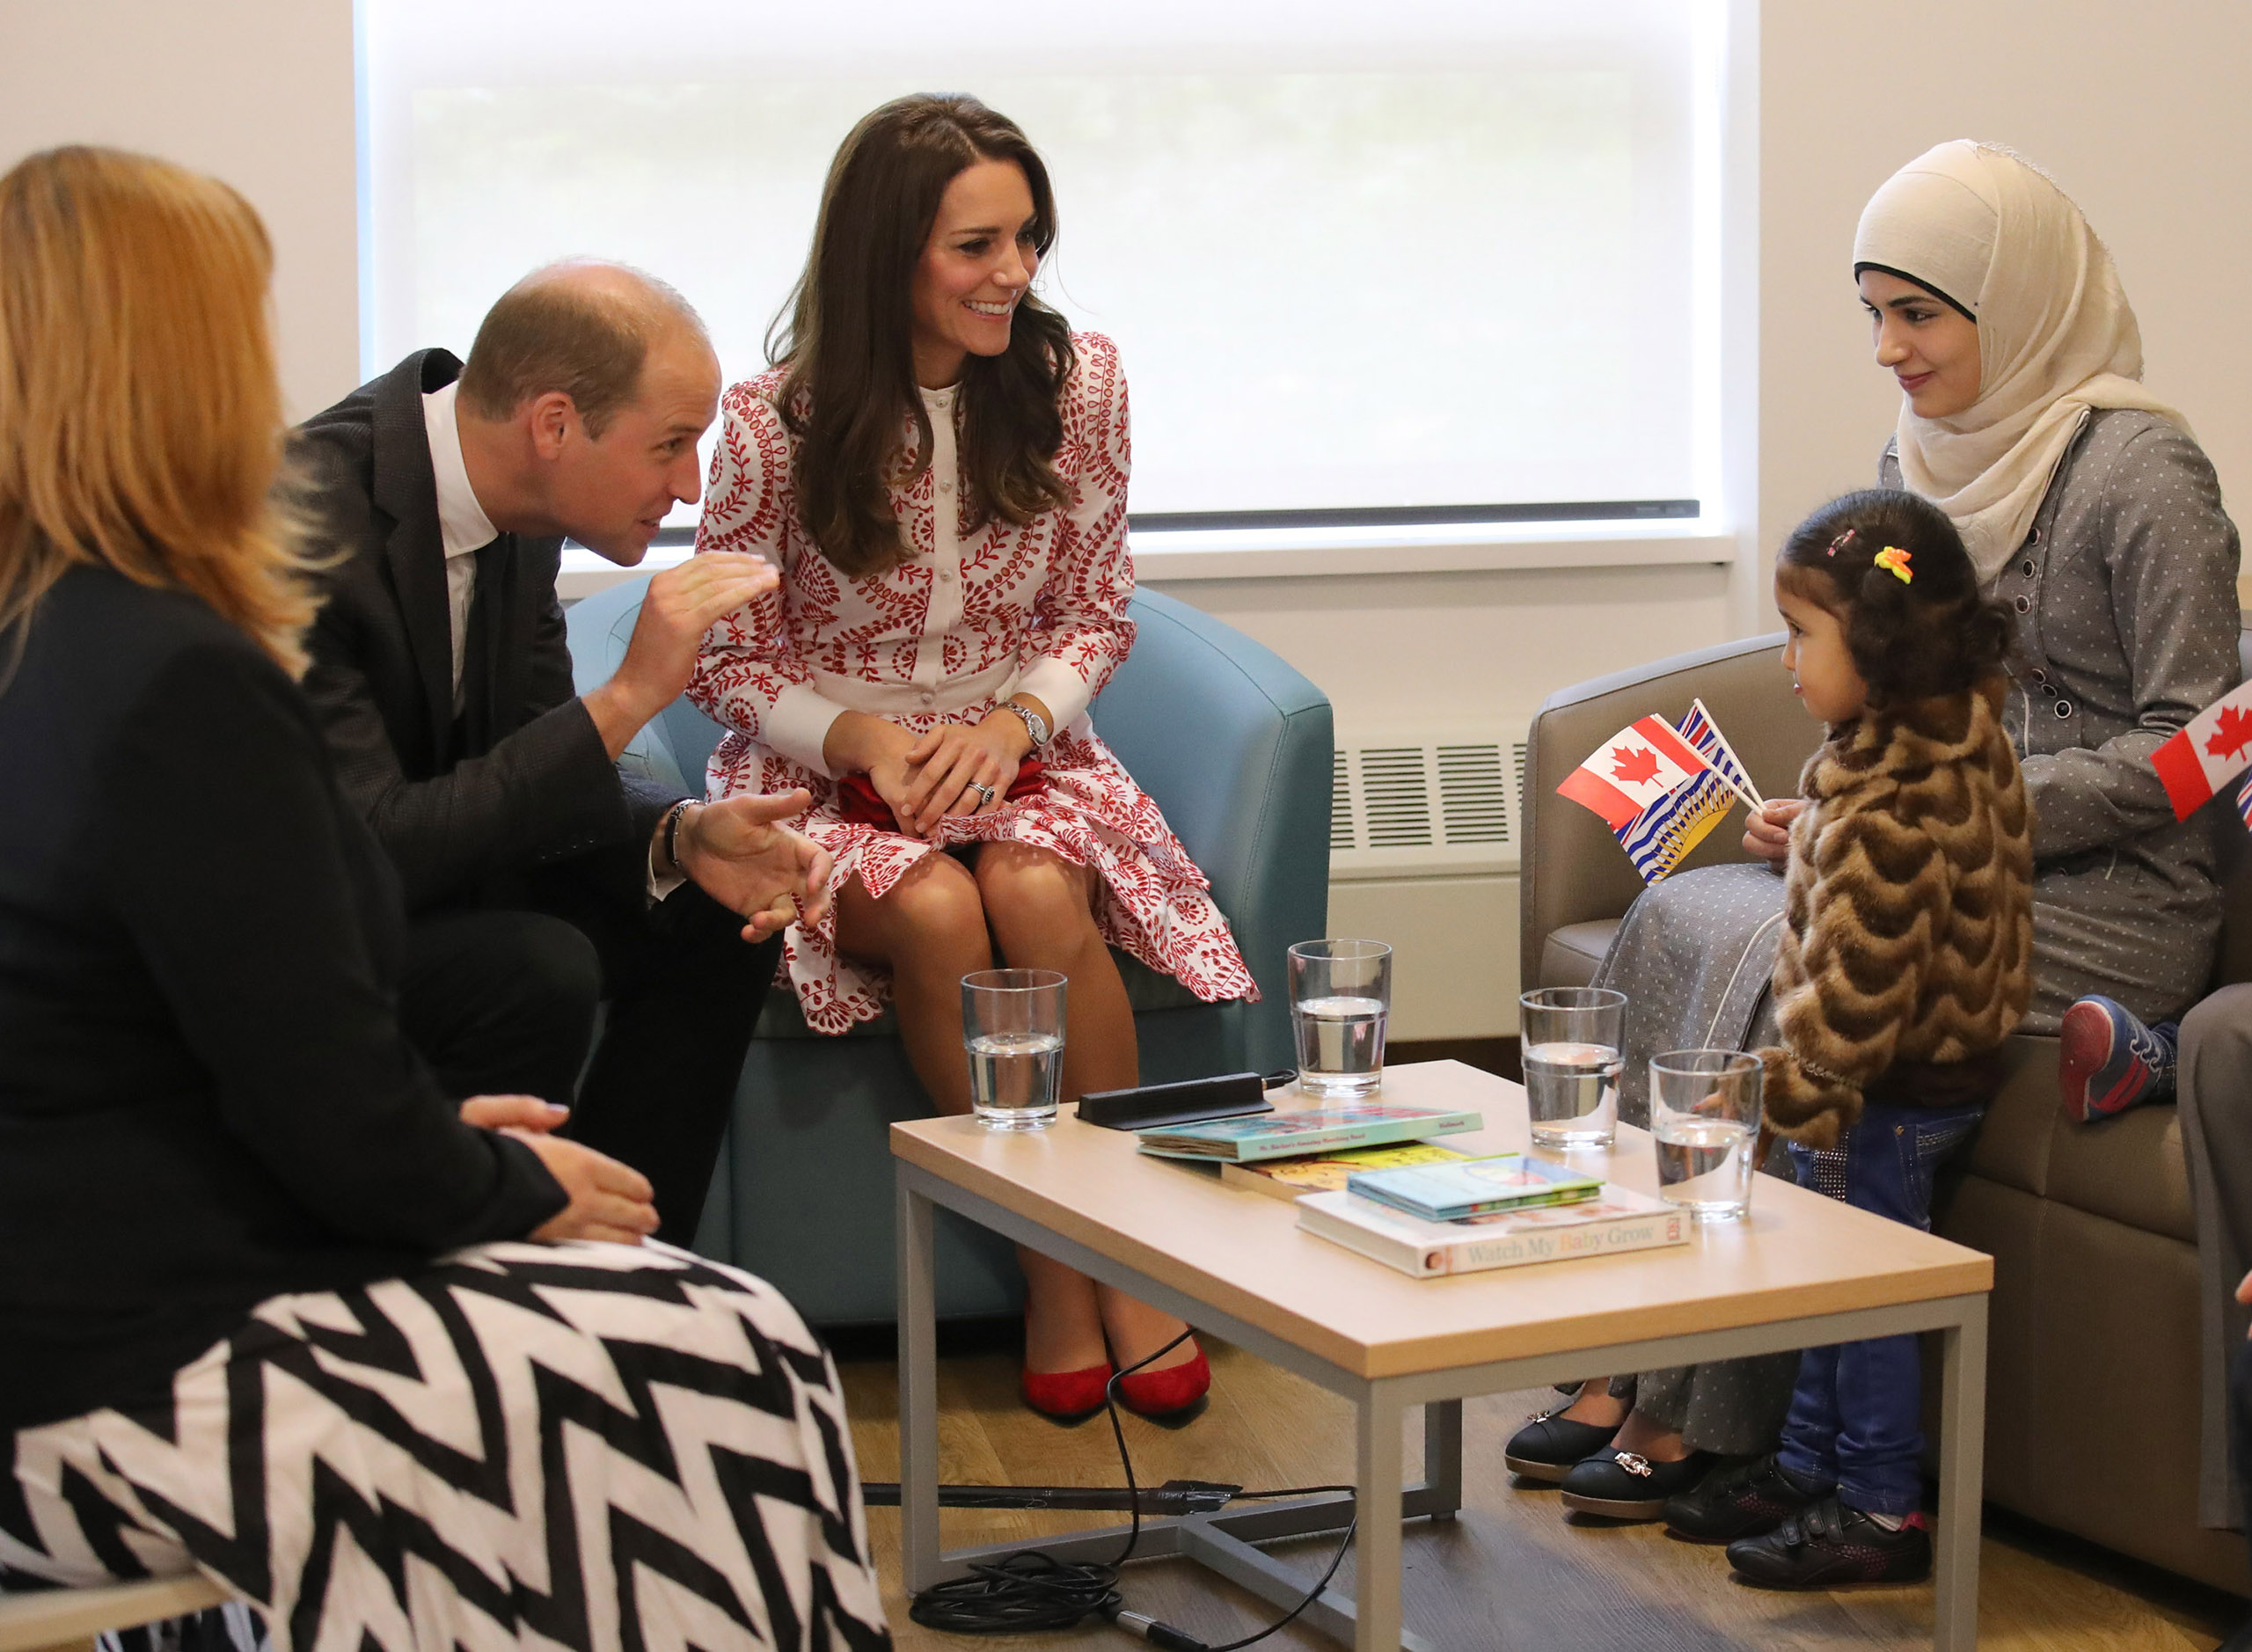 Prince William, Duke of Cambridge, and Catherine, Duchess of Cambridge, with Syrian refugees Yosra Alamahameed and her daughter, Reemus, during their visit to the Immigrant Services Society of British Columbia New Welcome Centre during their Royal Tour of Canada in Vancouver on Sept. 25, 2016.